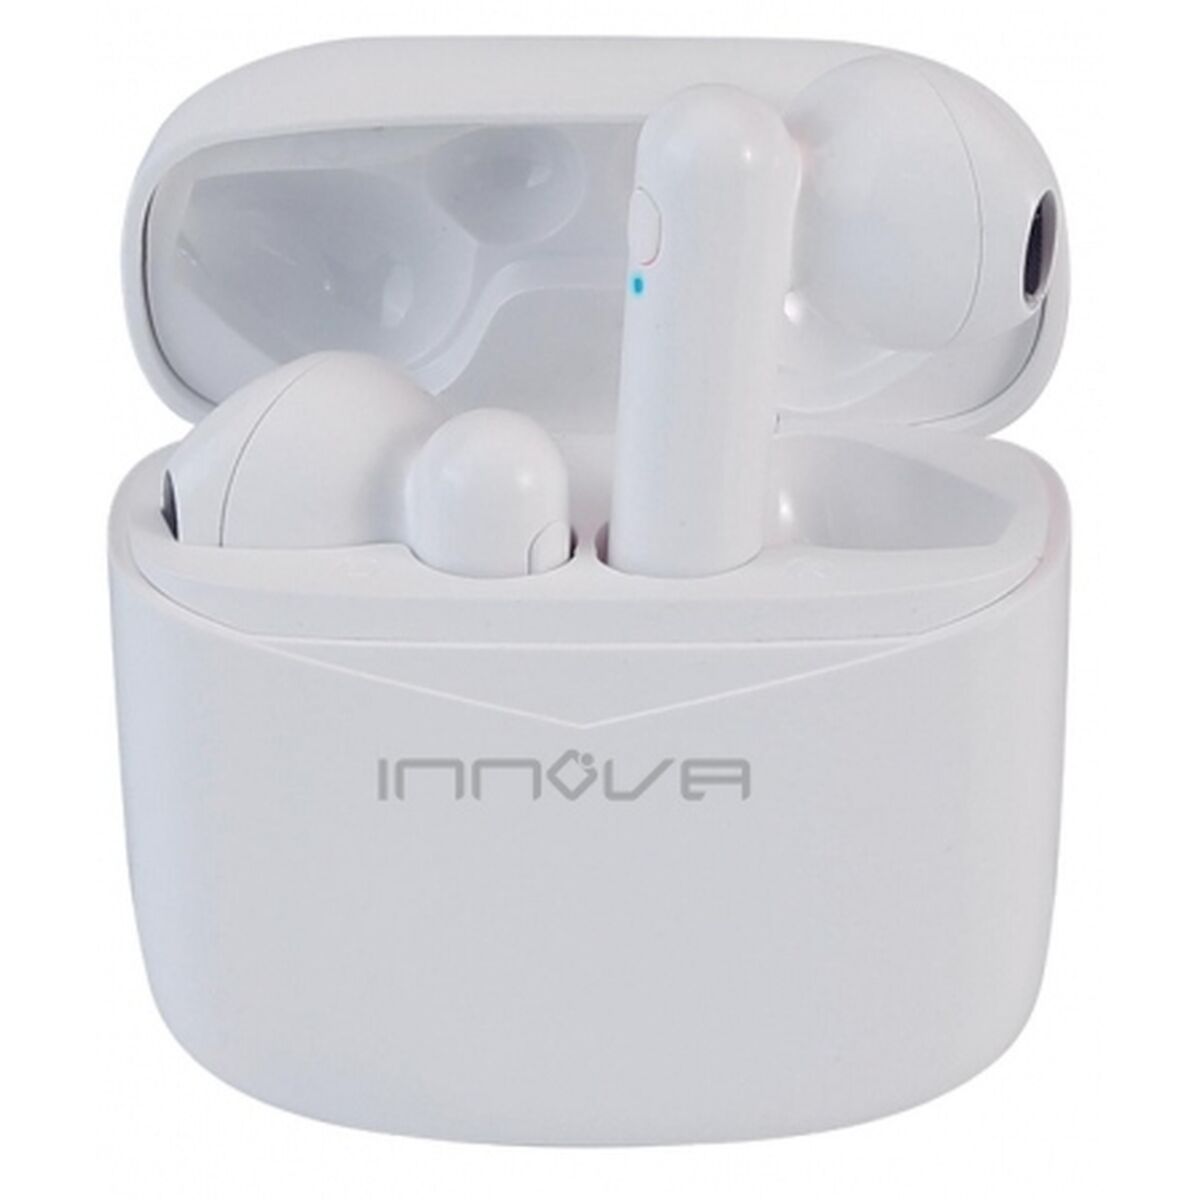 Bluetooth Headphones Innova, Innova, Electronics, Mobile communication and accessories, bluetooth-headphones-innova, :Wireless Headphones, Brand_Innova, category-reference-2609, category-reference-2642, category-reference-2847, category-reference-t-19653, category-reference-t-21312, category-reference-t-4036, category-reference-t-4037, computers / peripherals, Condition_NEW, entertainment, gadget, music, office, Price_20 - 50, telephones & tablets, Teleworking, RiotNook